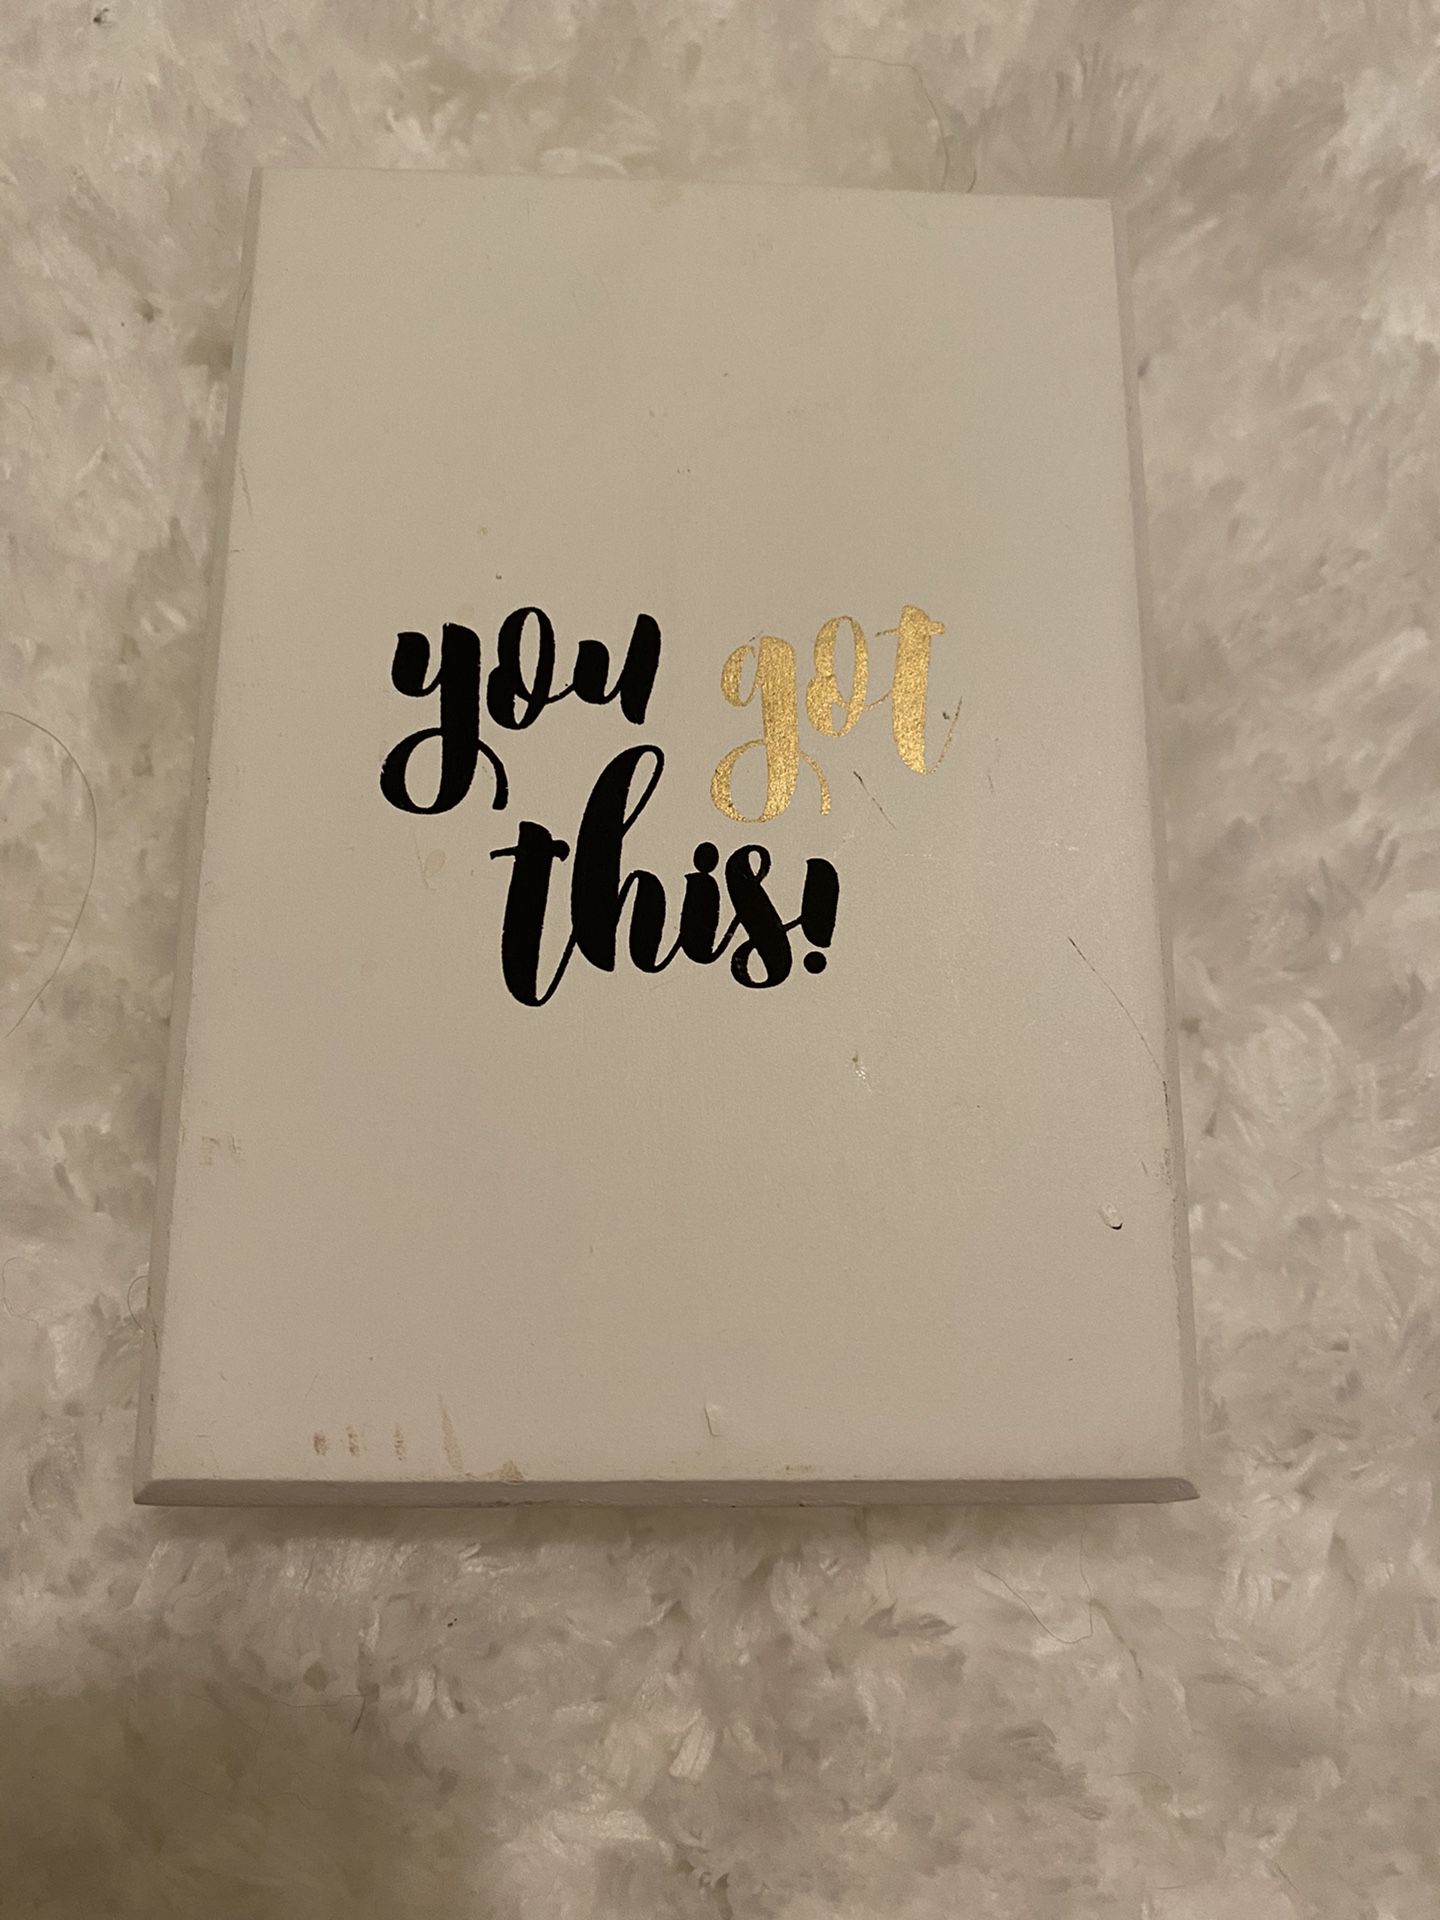 Small Wood Canvas Art - White, Gold, Black - “You Got This”